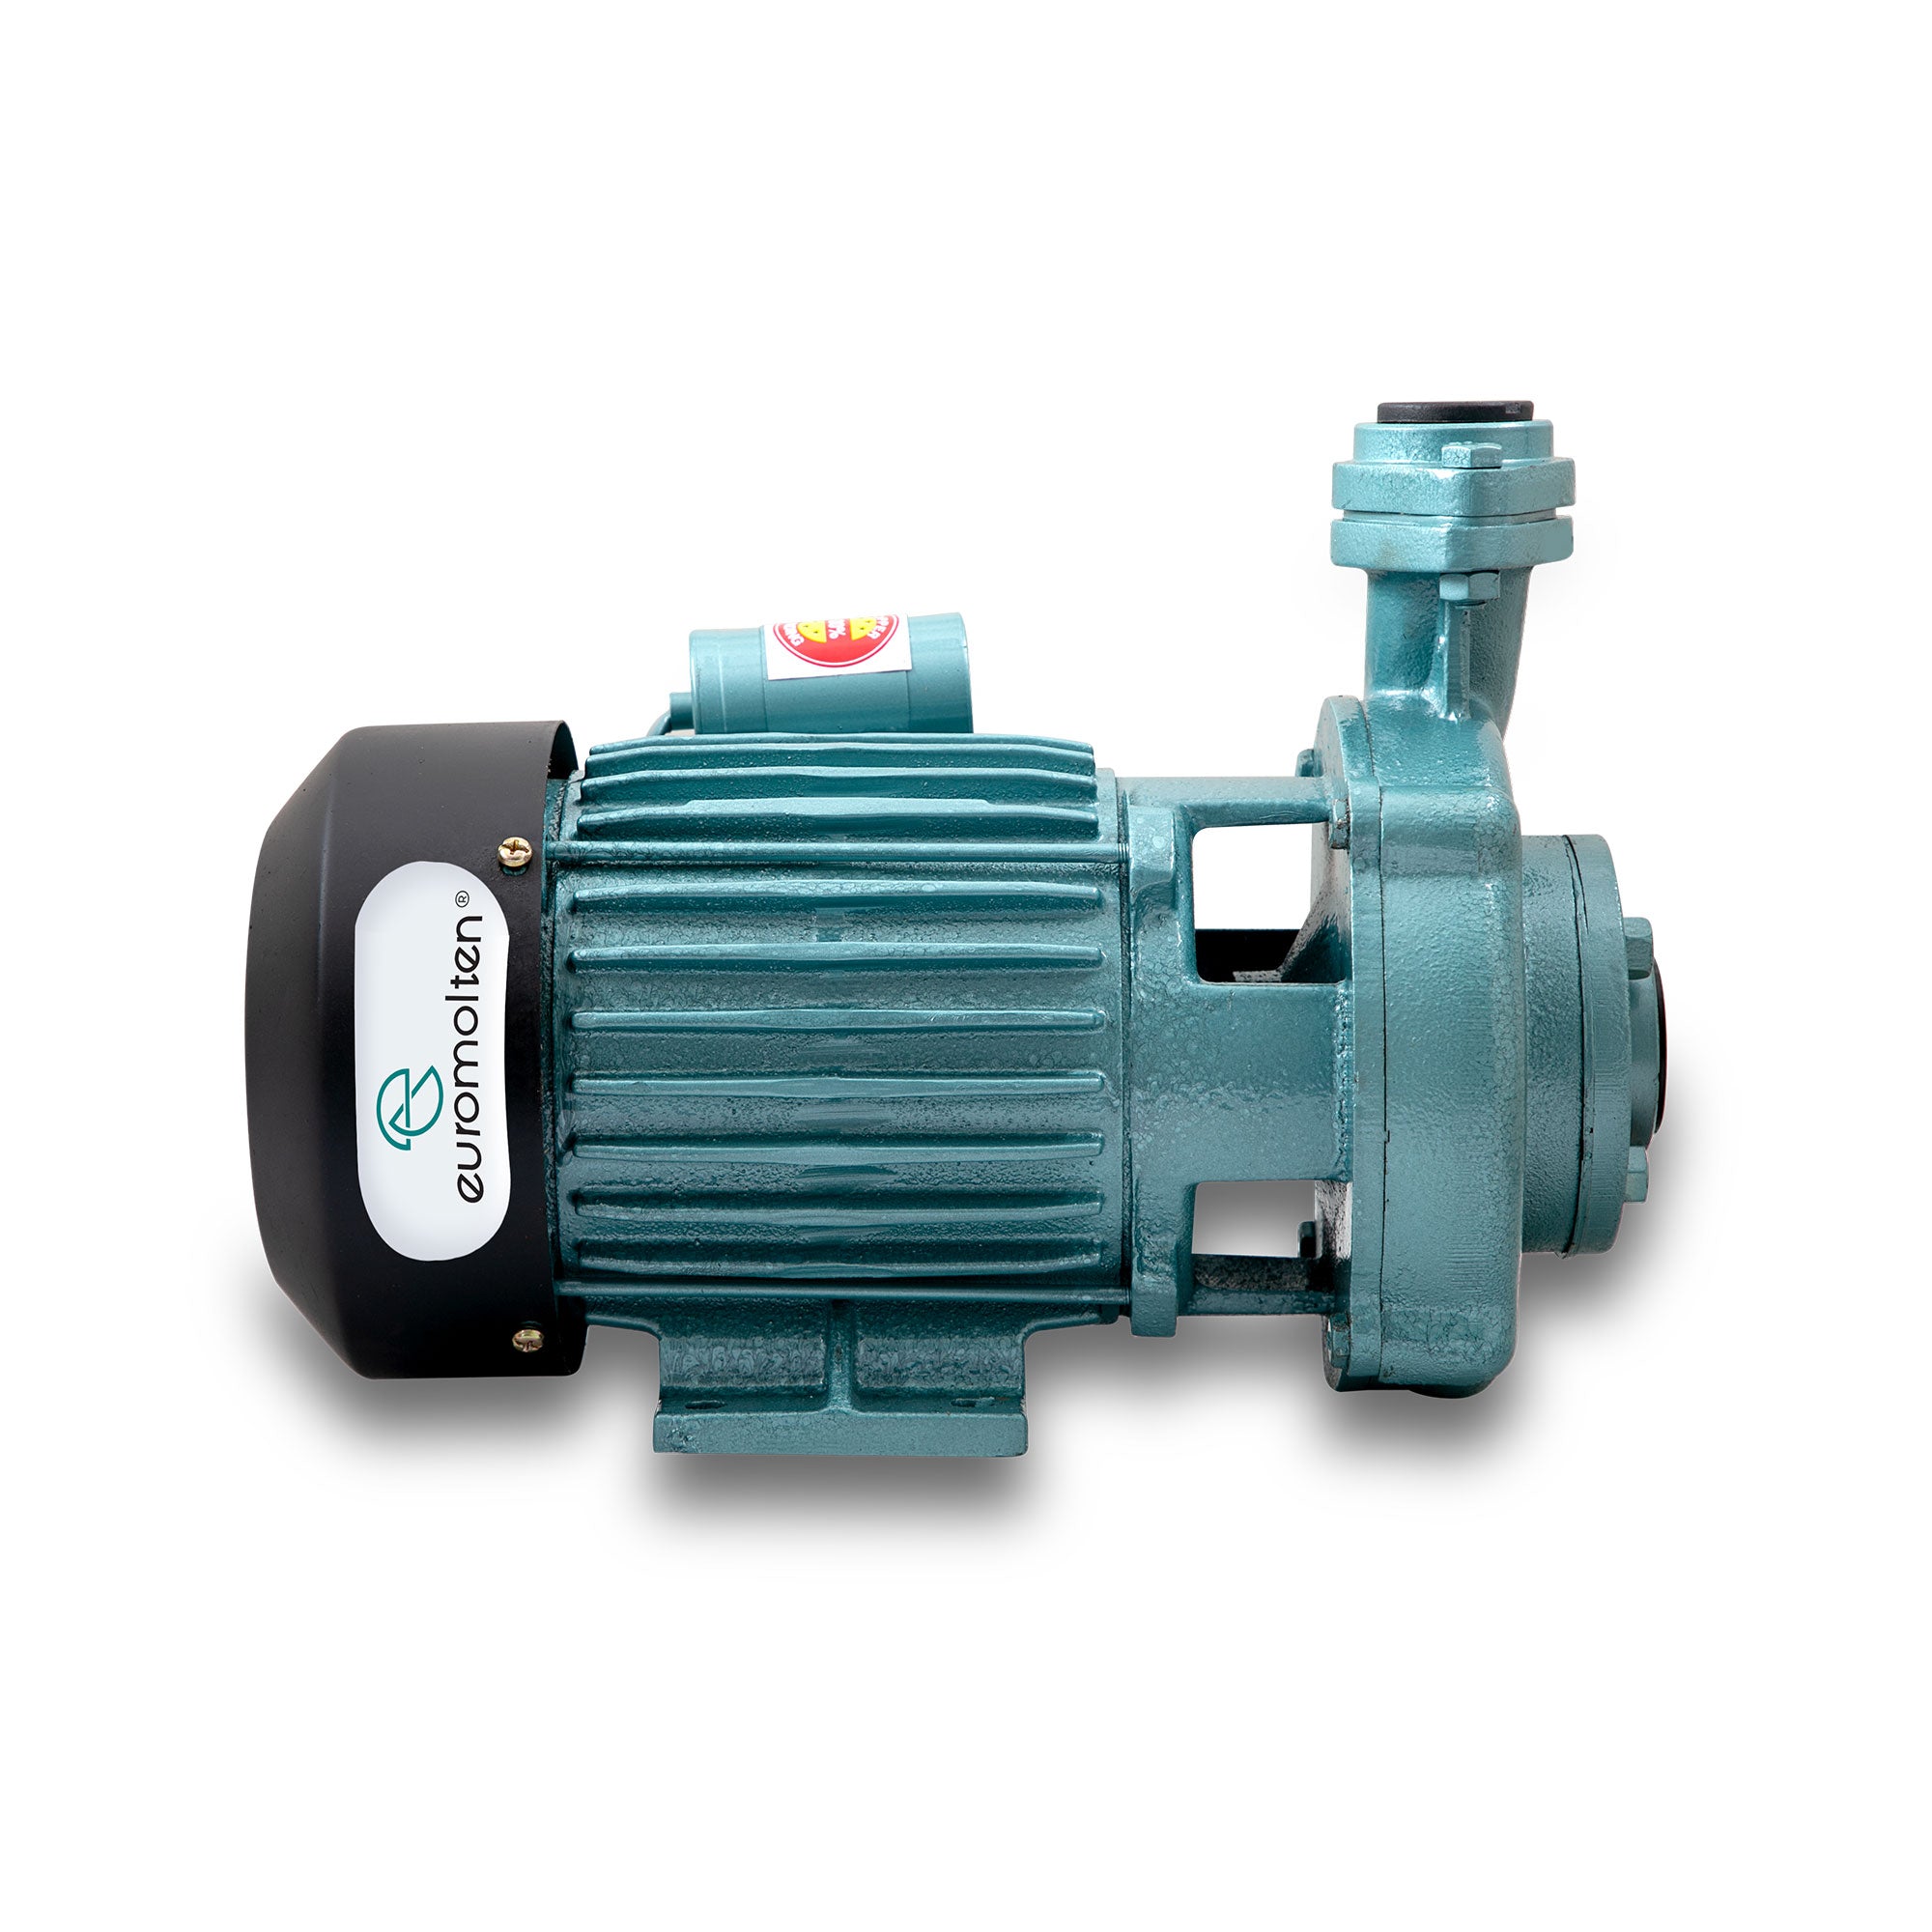 Buy 1.5Hp Centrifugal Monobloc high discharge Pumps Online